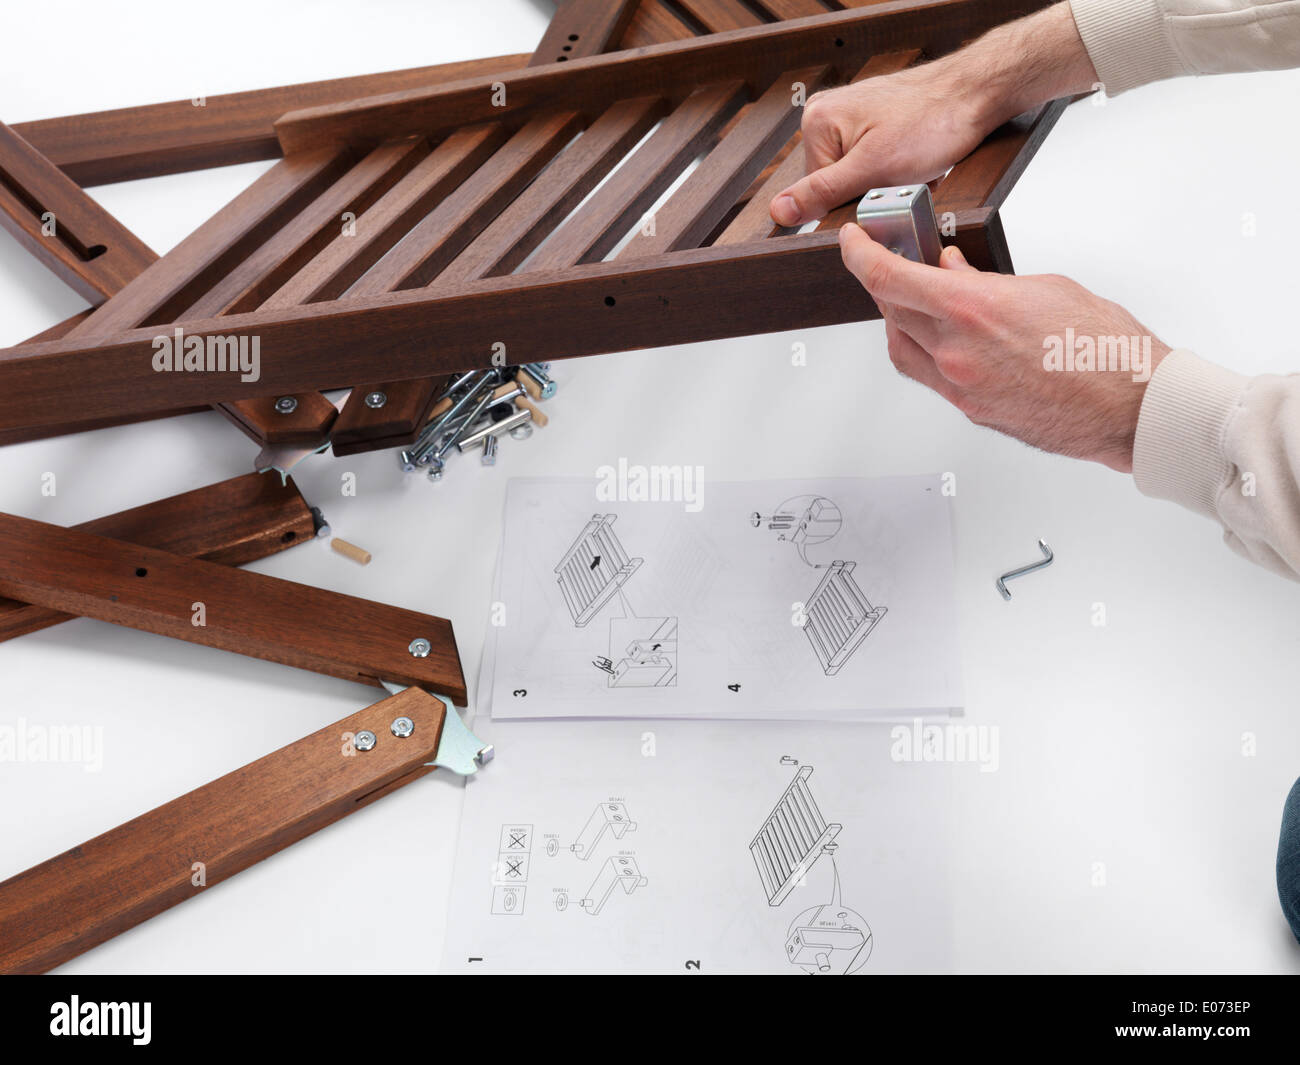 Person assembling IKEA furniture parts with instructions Stock Photo